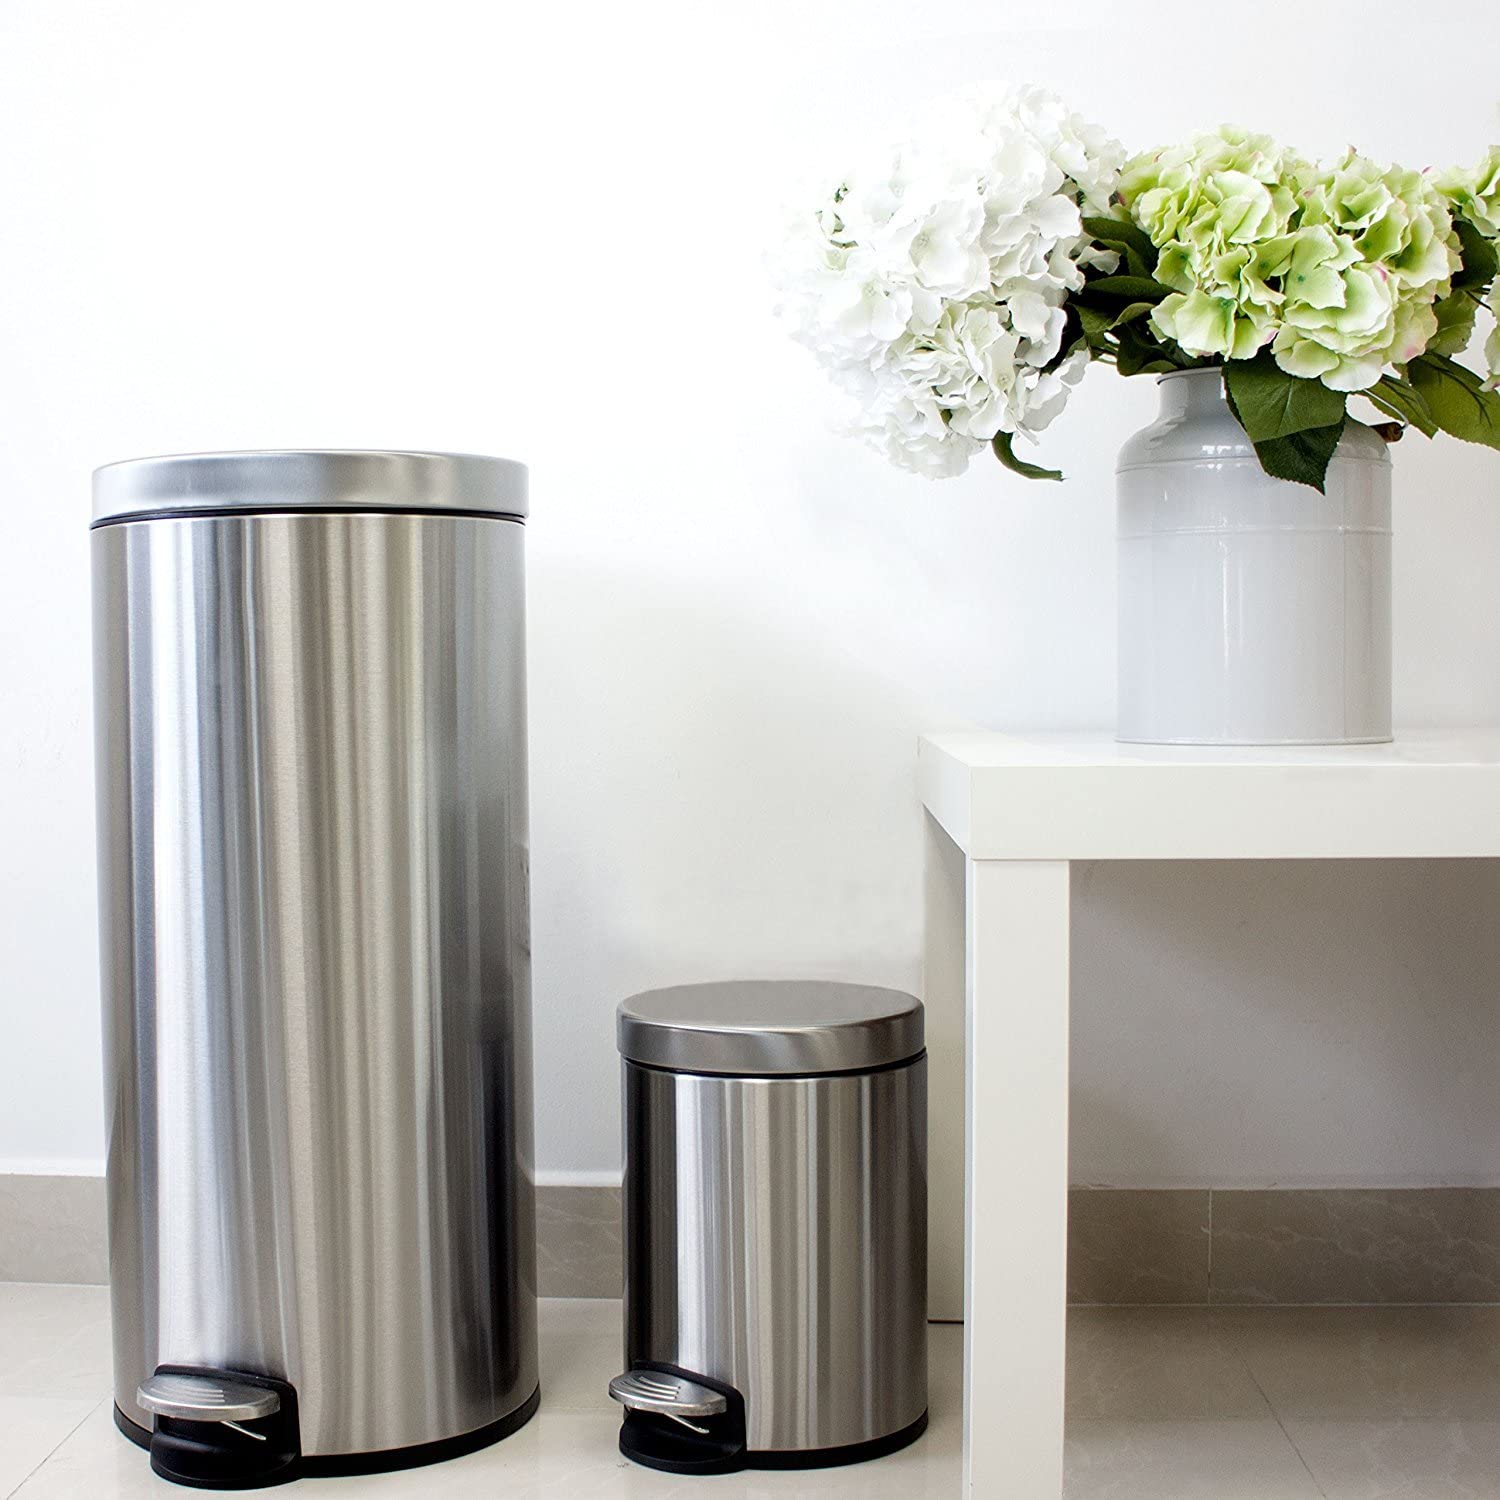 8 Gallon Trash Can, Stainless Steel Step On Kitchen Garbage Can with Lid